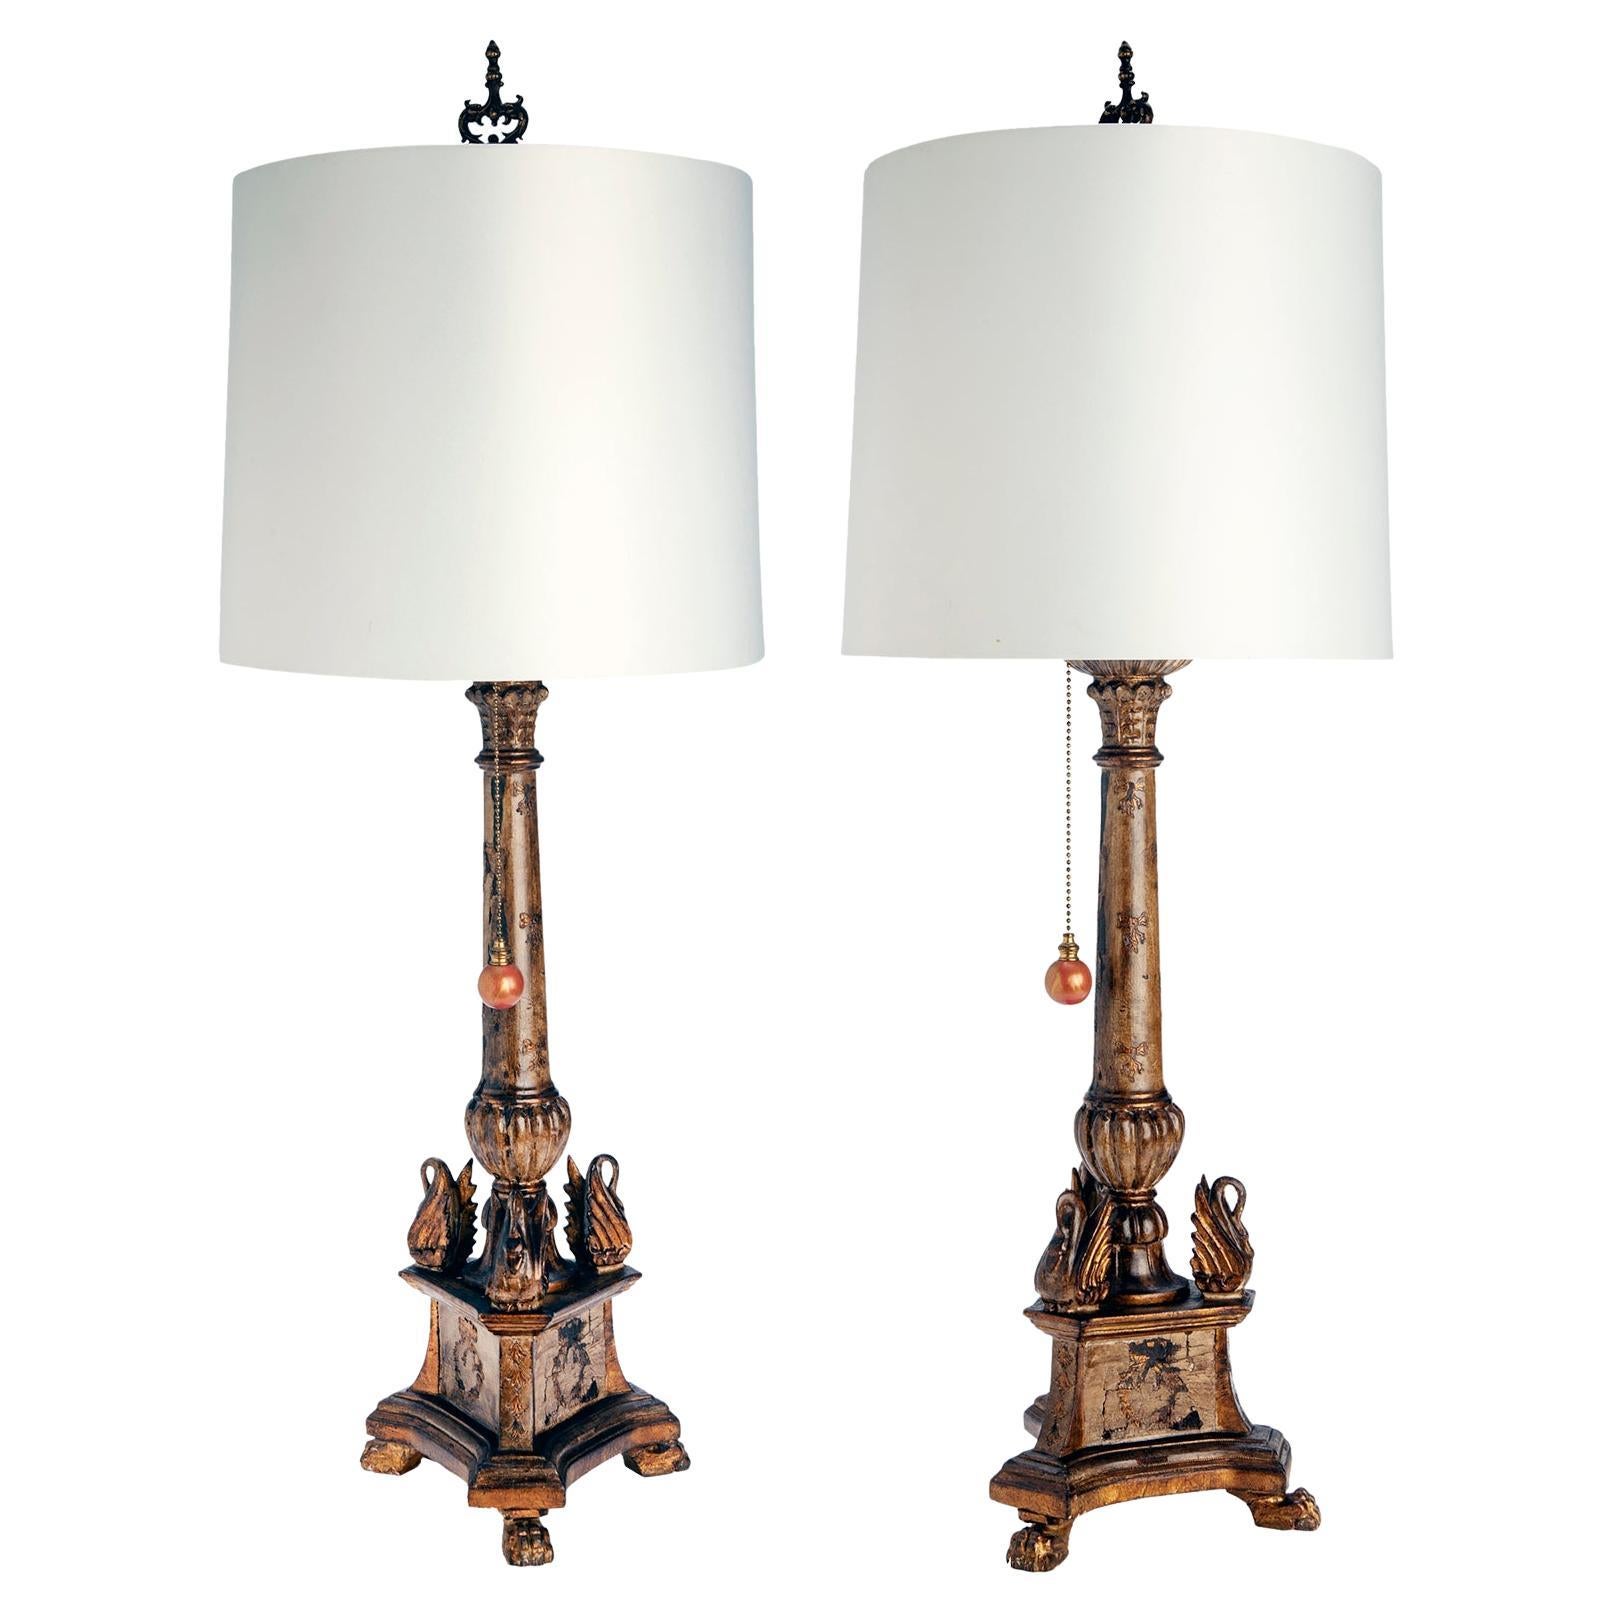 Hand Carved Table Lamps White Shades; a pair